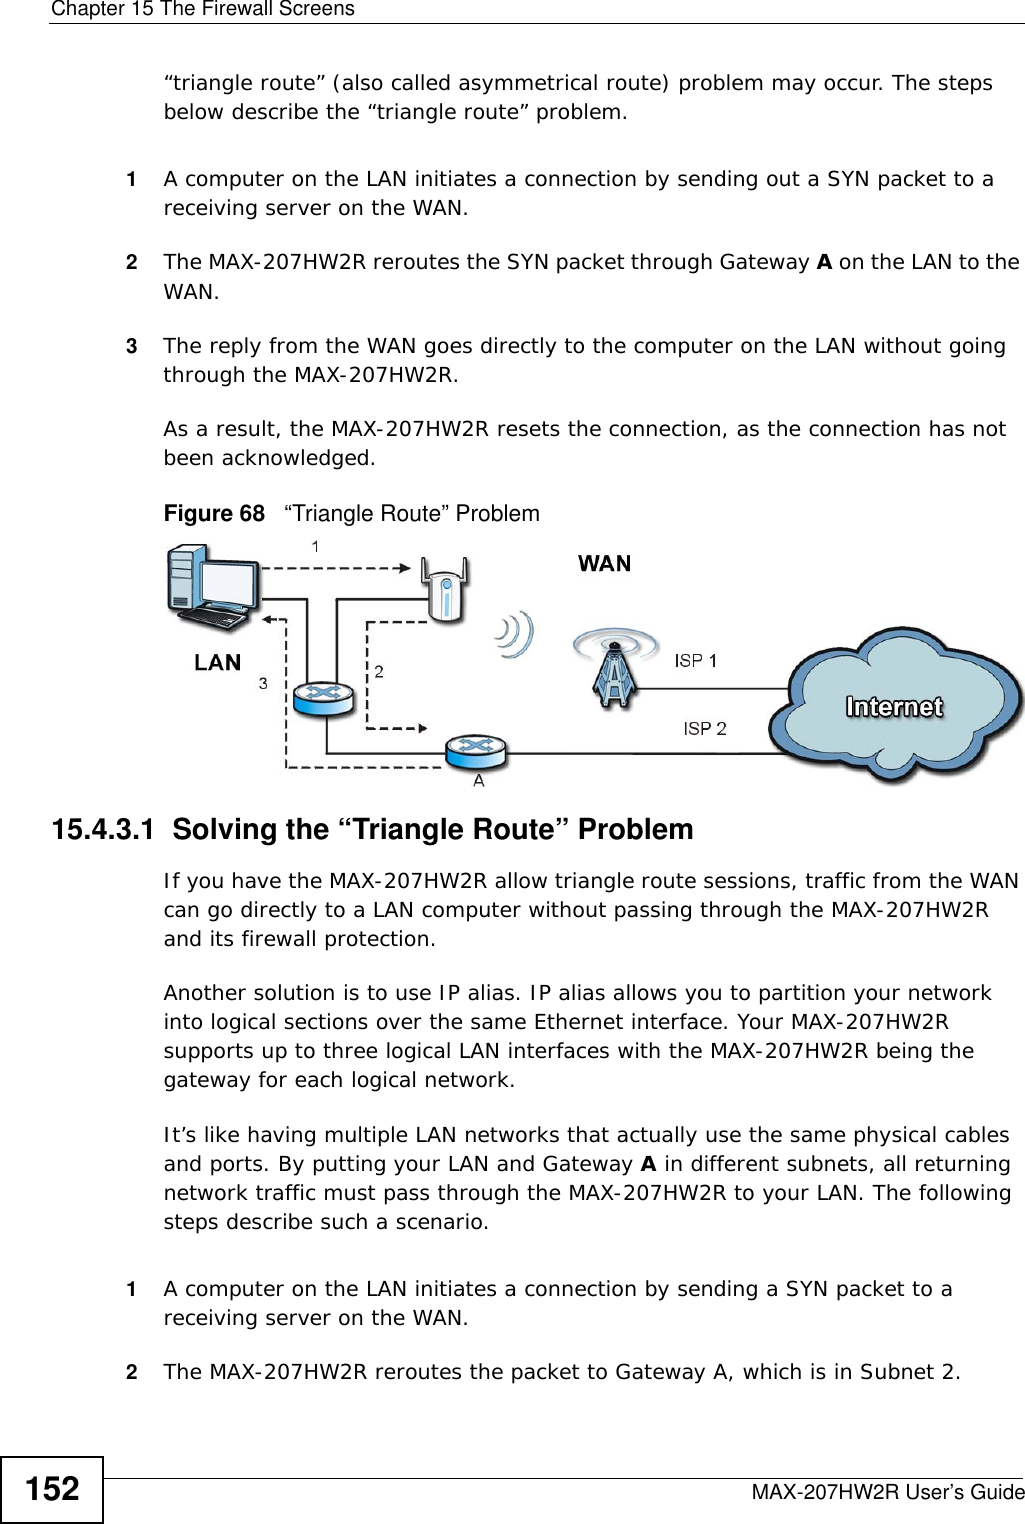 Chapter 15 The Firewall ScreensMAX-207HW2R User’s Guide152“triangle route” (also called asymmetrical route) problem may occur. The steps below describe the “triangle route” problem. 1A computer on the LAN initiates a connection by sending out a SYN packet to a receiving server on the WAN.2The MAX-207HW2R reroutes the SYN packet through Gateway A on the LAN to the WAN. 3The reply from the WAN goes directly to the computer on the LAN without going through the MAX-207HW2R. As a result, the MAX-207HW2R resets the connection, as the connection has not been acknowledged.Figure 68   “Triangle Route” Problem15.4.3.1  Solving the “Triangle Route” ProblemIf you have the MAX-207HW2R allow triangle route sessions, traffic from the WAN can go directly to a LAN computer without passing through the MAX-207HW2R and its firewall protection. Another solution is to use IP alias. IP alias allows you to partition your network into logical sections over the same Ethernet interface. Your MAX-207HW2R supports up to three logical LAN interfaces with the MAX-207HW2R being the gateway for each logical network. It’s like having multiple LAN networks that actually use the same physical cables and ports. By putting your LAN and Gateway A in different subnets, all returning network traffic must pass through the MAX-207HW2R to your LAN. The following steps describe such a scenario.1A computer on the LAN initiates a connection by sending a SYN packet to a receiving server on the WAN. 2The MAX-207HW2R reroutes the packet to Gateway A, which is in Subnet 2. 